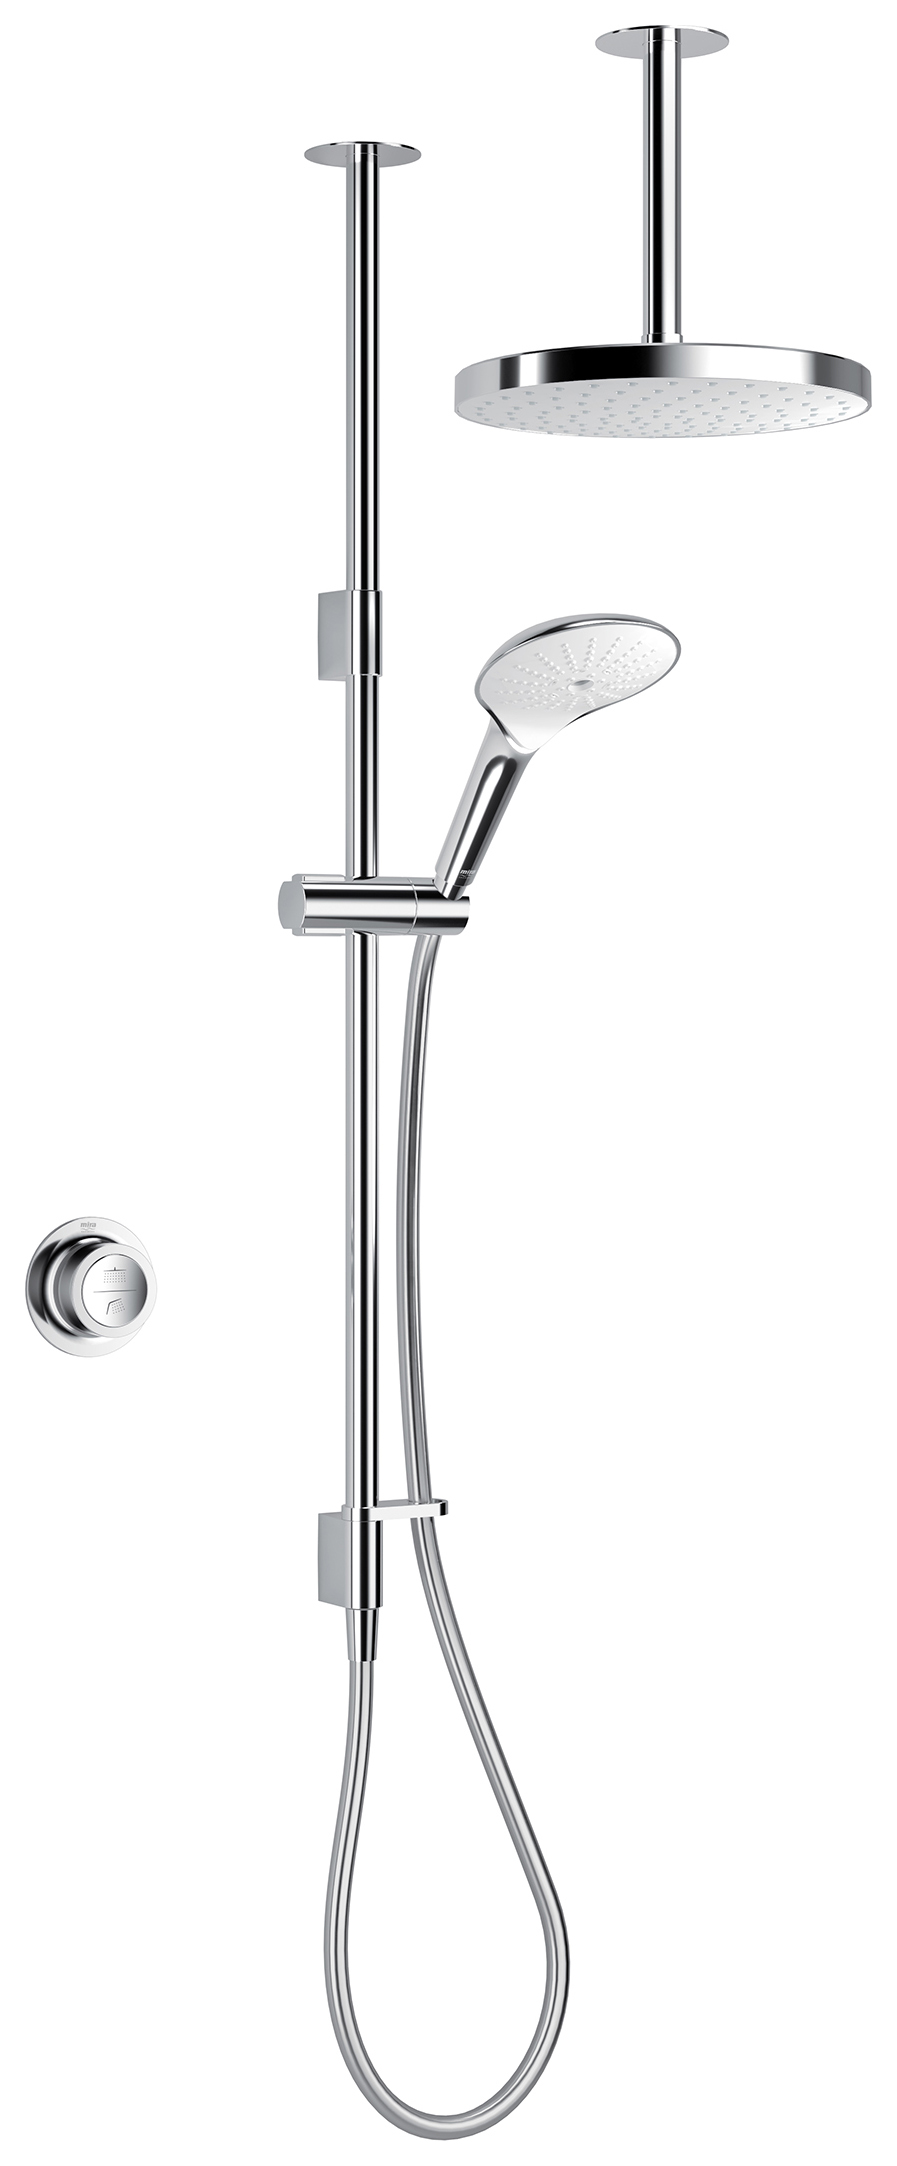 Image of Mira Mode Dual Outlet High Pressure Combi Ceiling Fed Digital Mixer Shower - Chrome